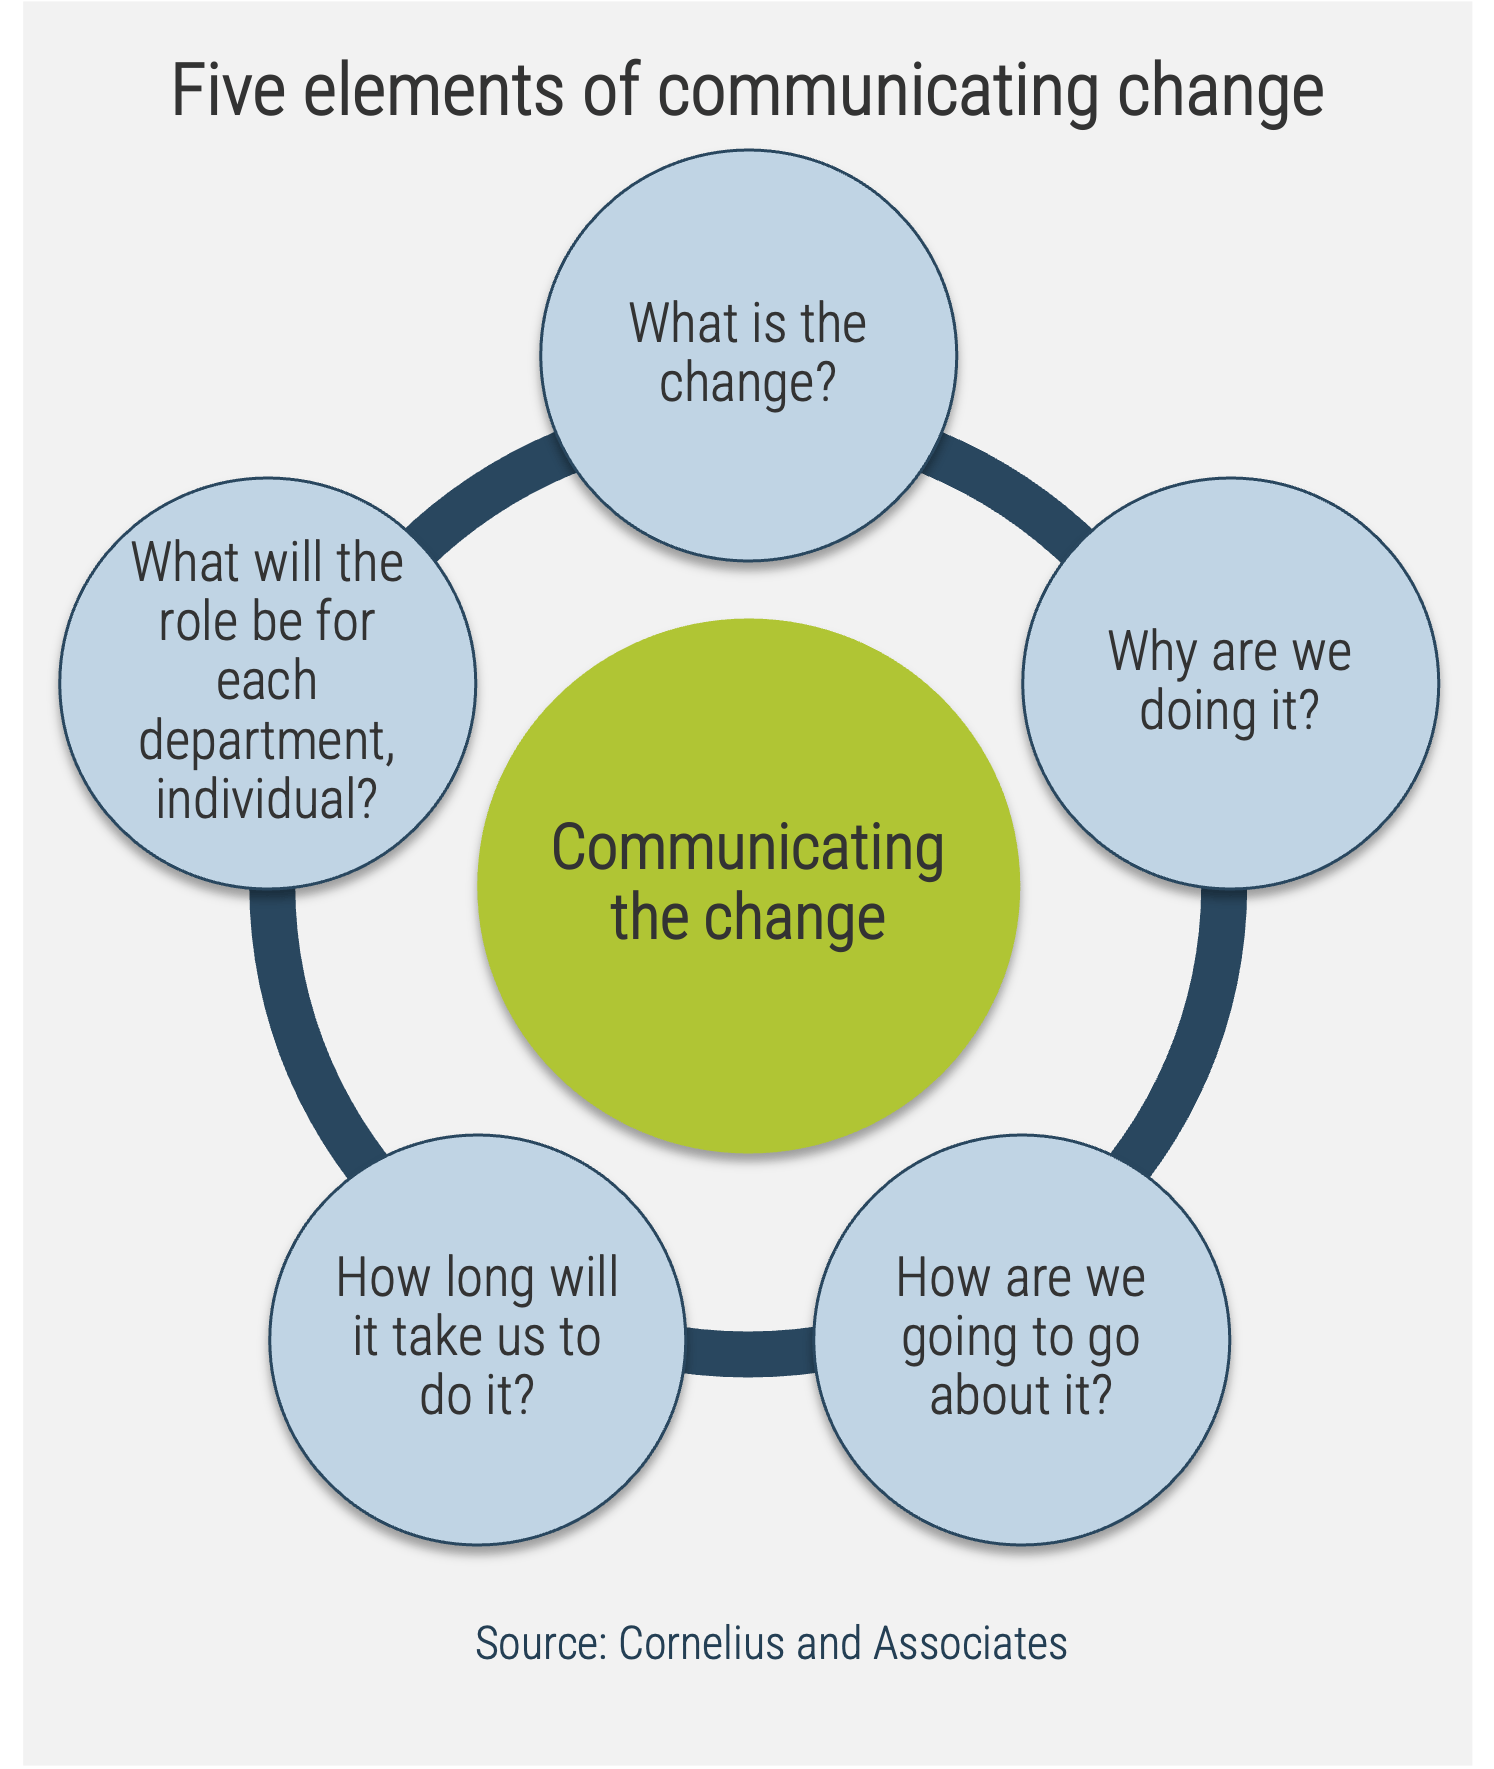 Five elements of communicating change: What is the change? Why are we doing it? How are we going to go about it? How long will it take us to do it? What will the role be for each department individual?